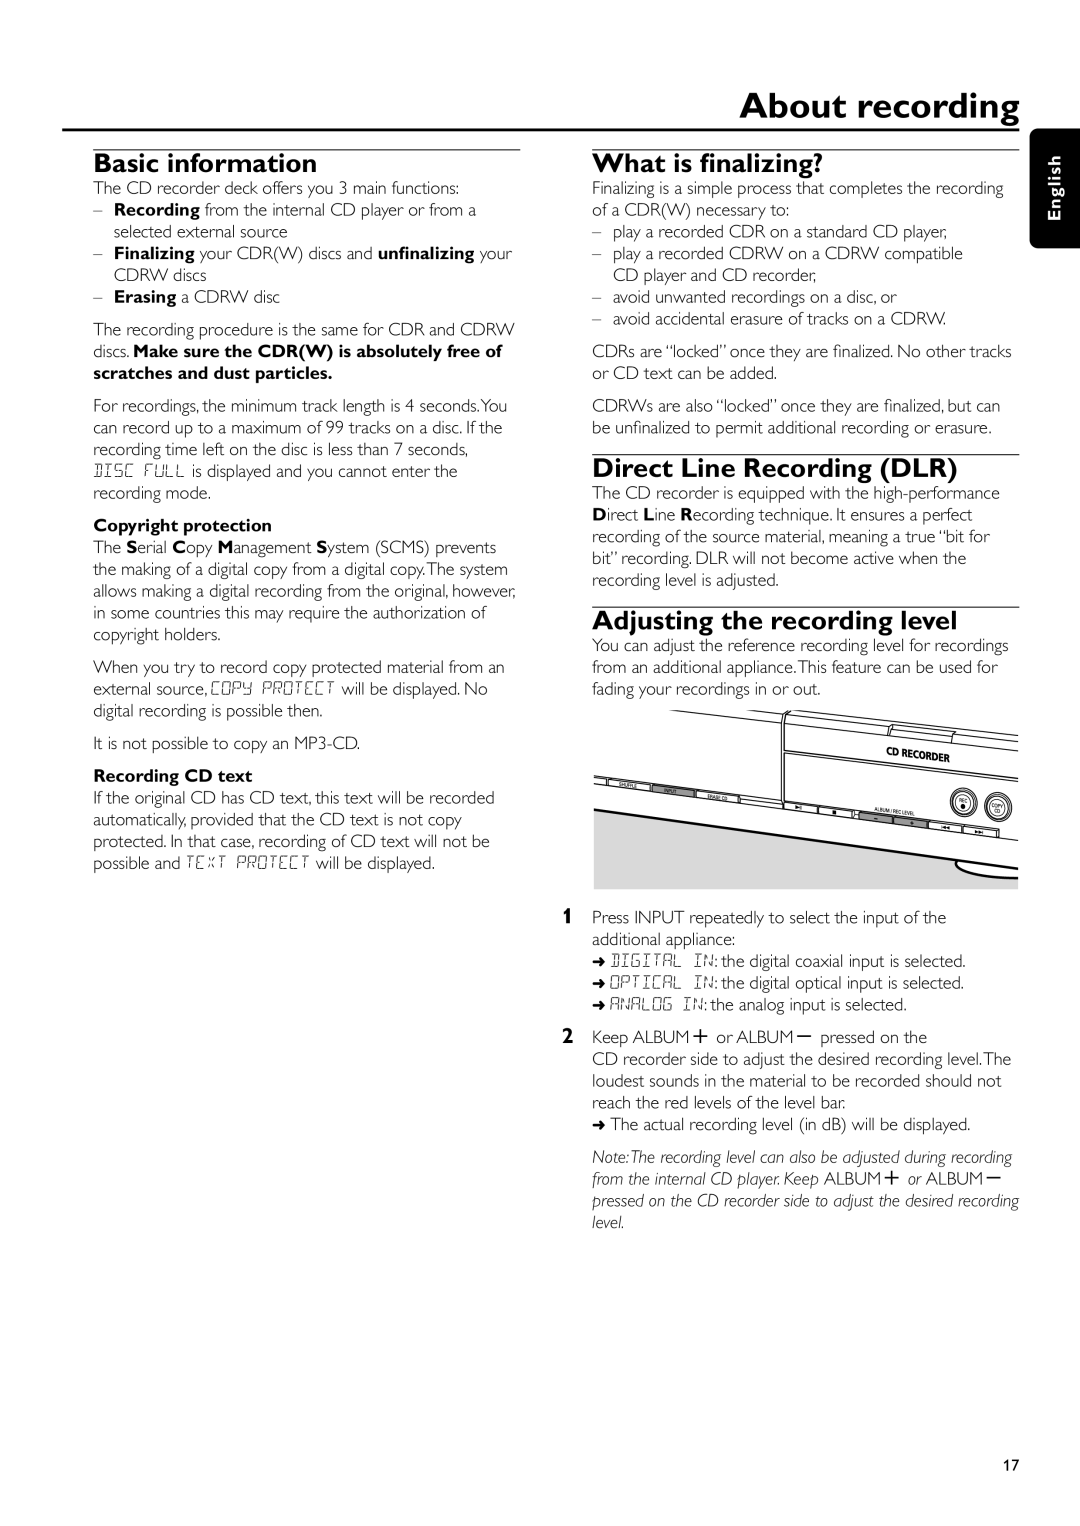 Philips CDR-795 About recording, Basic information, What is ﬁnalizing?, Direct Line Recording DLR, Copyright protection 